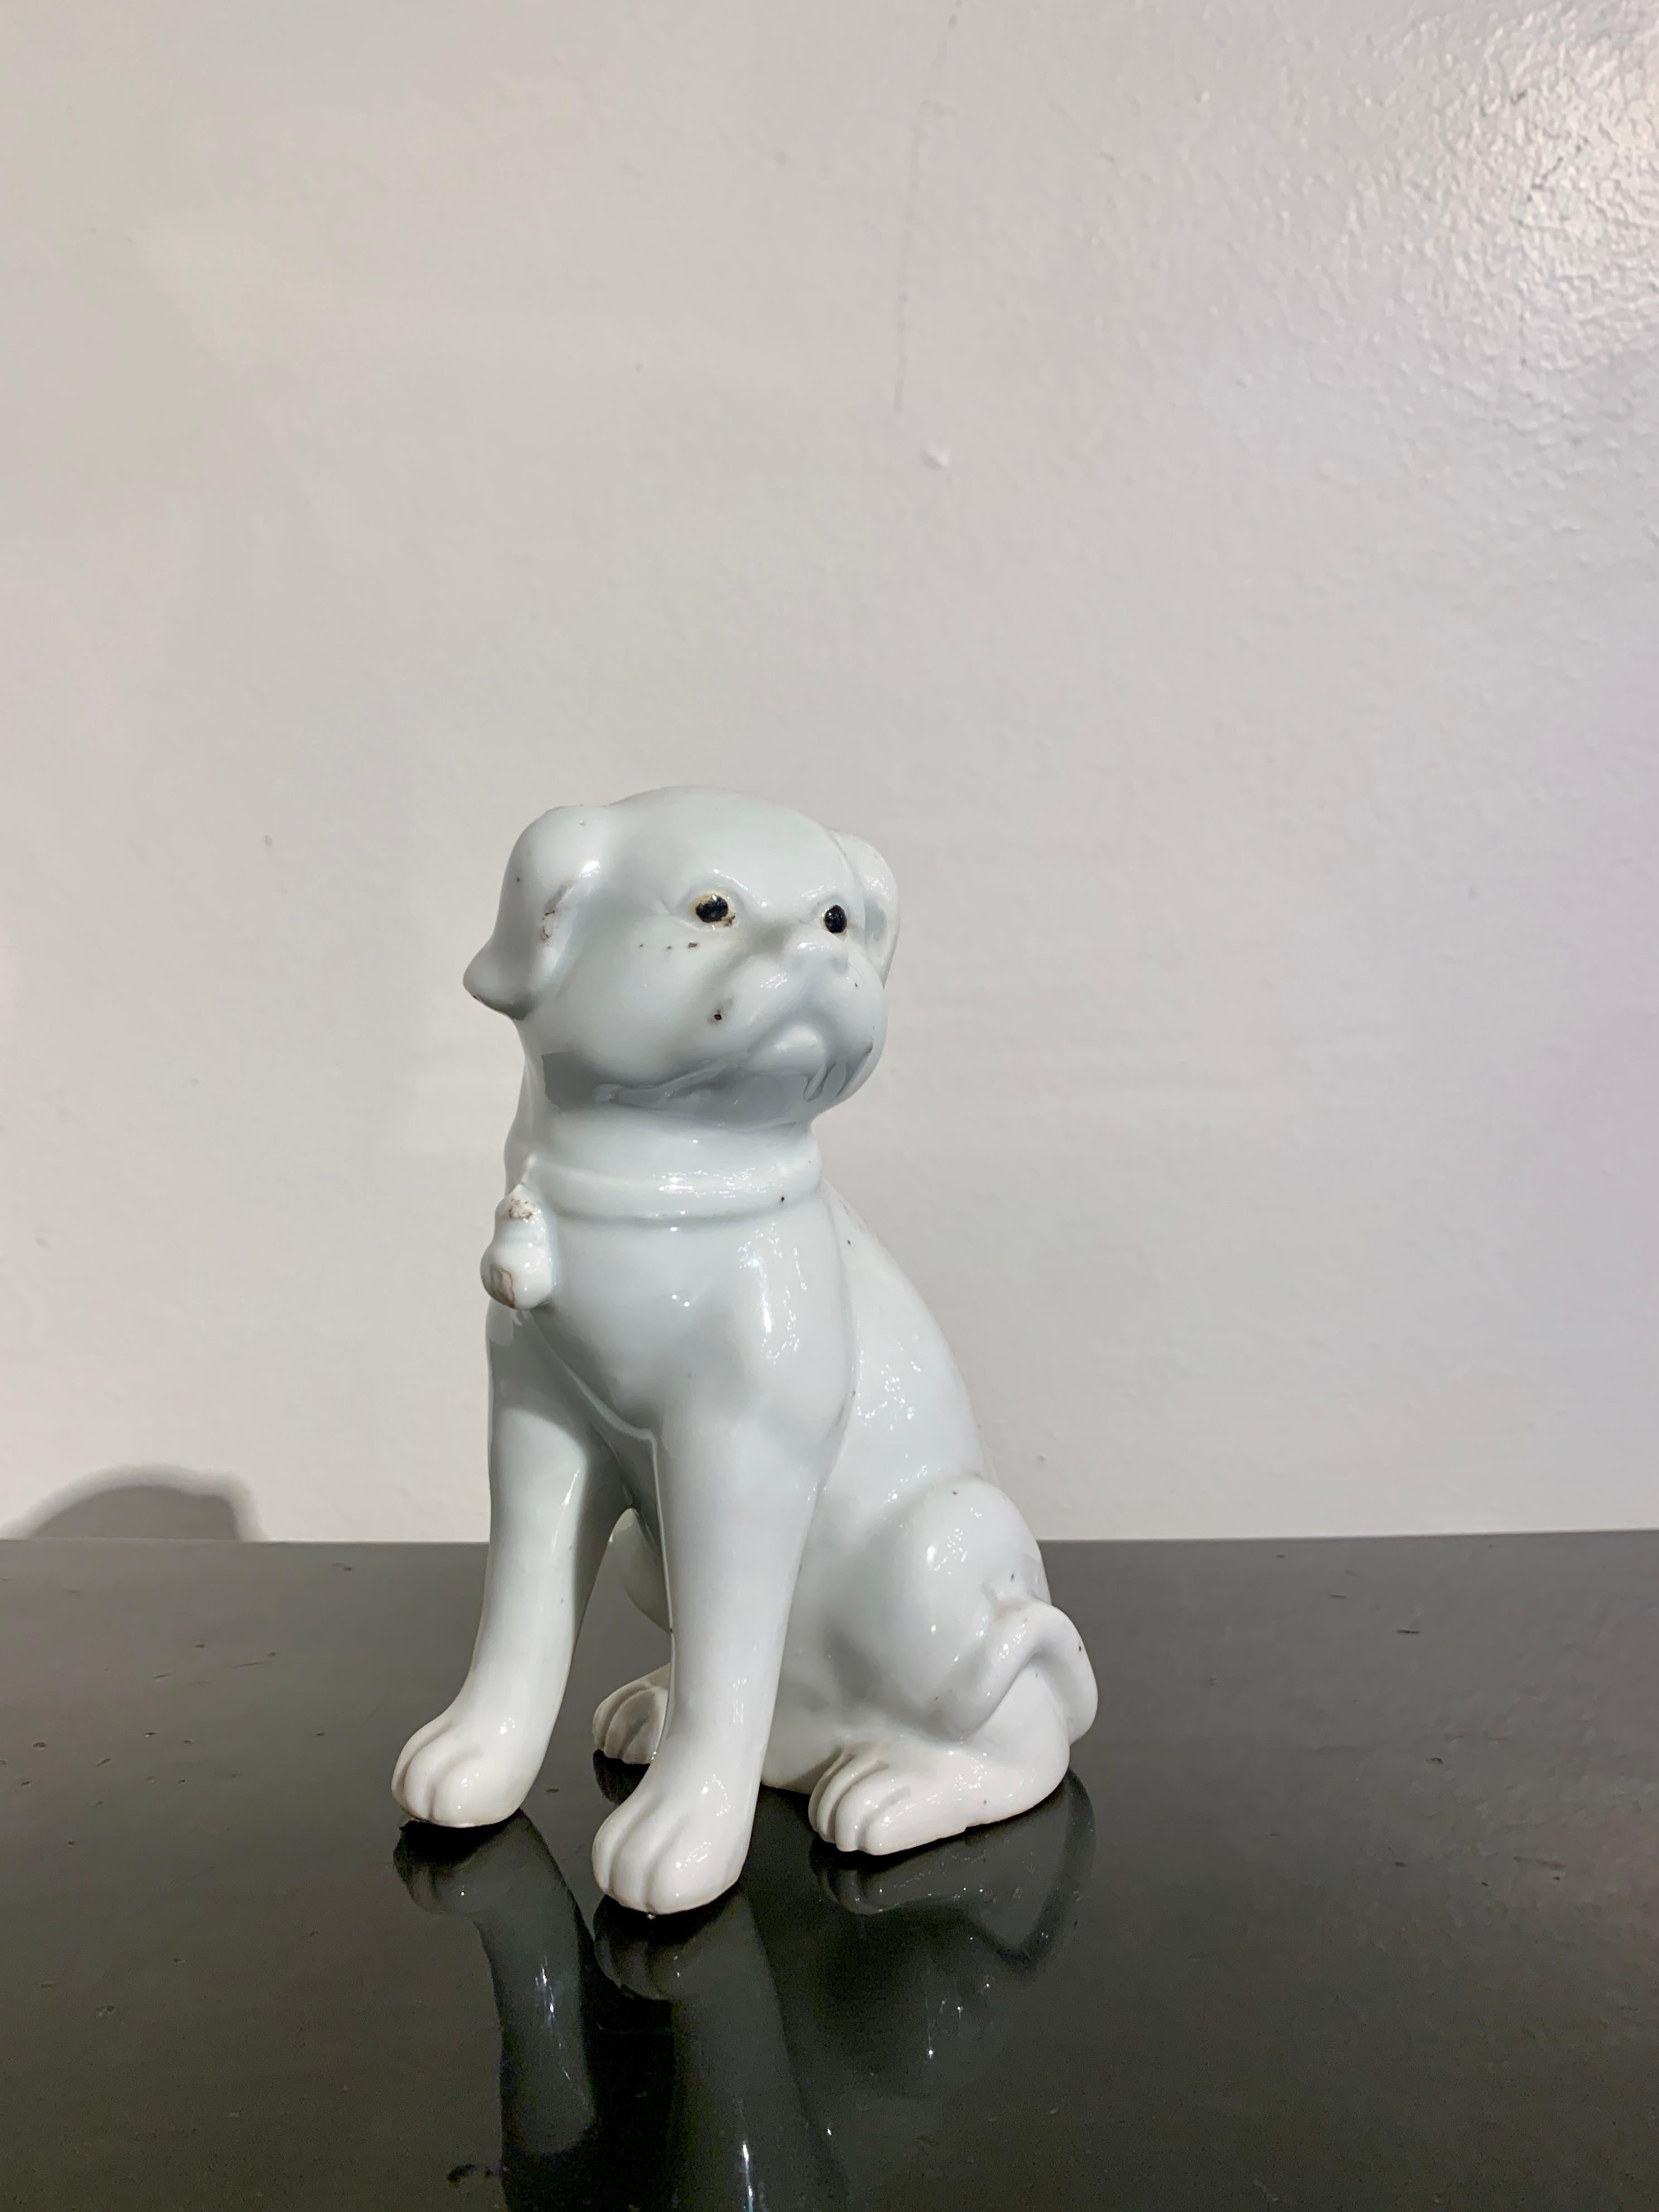 An absolutely adorable Japanese Hirado Mikawachi ware white glazed porcelain model of a puppy dog, Edo to Meiji period, early to mid 19th century, Japan.

The cute puppy is portrayed seated upon his haunches, head turned, his long tail slightly